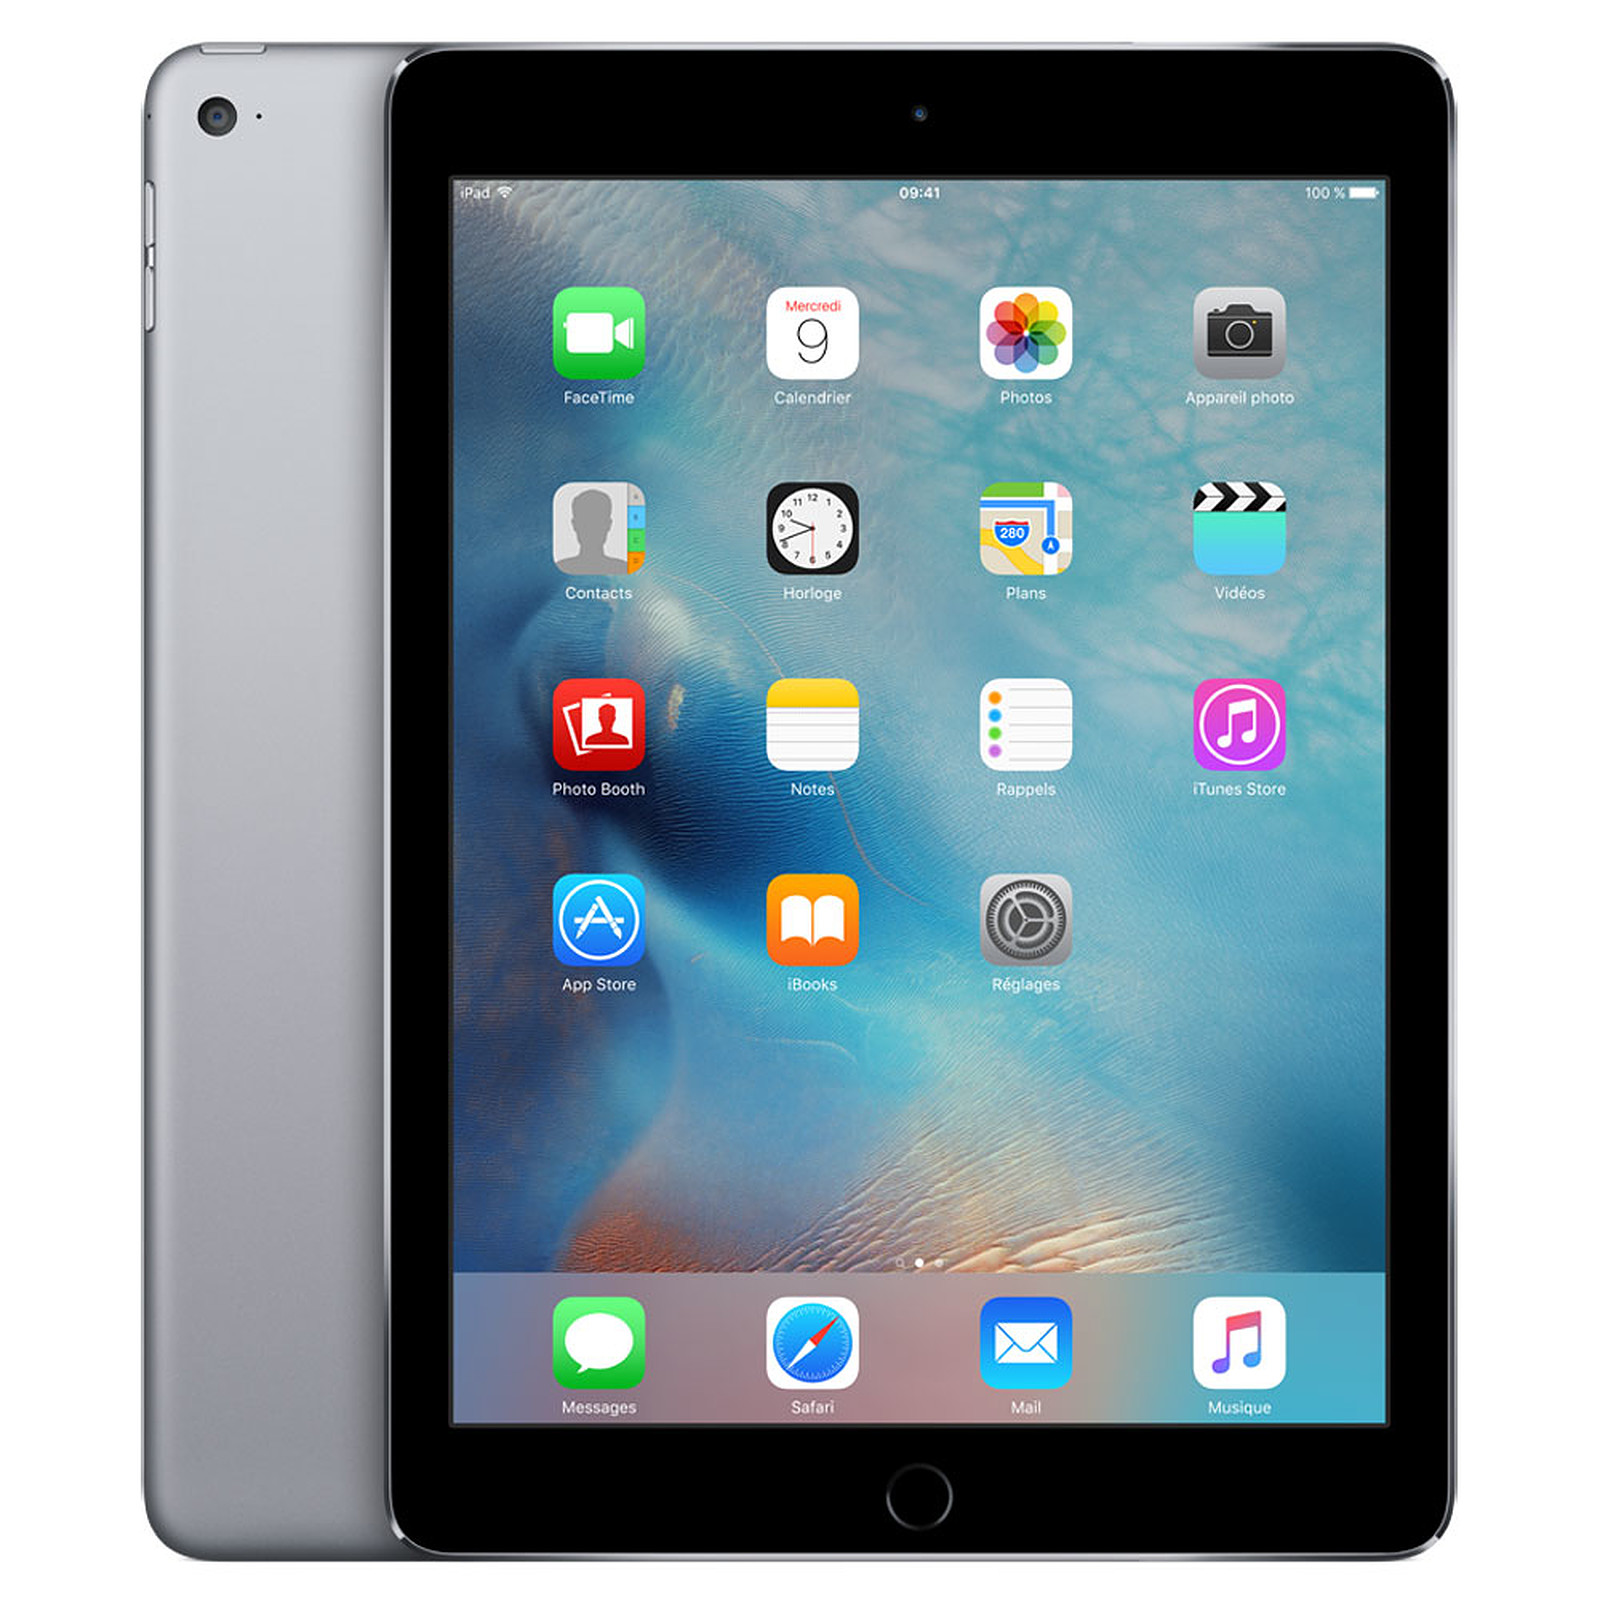 Apple iPad Air 2 16 Go Wi-Fi Gris Sideral · Reconditionne - Tablette tactile Apple